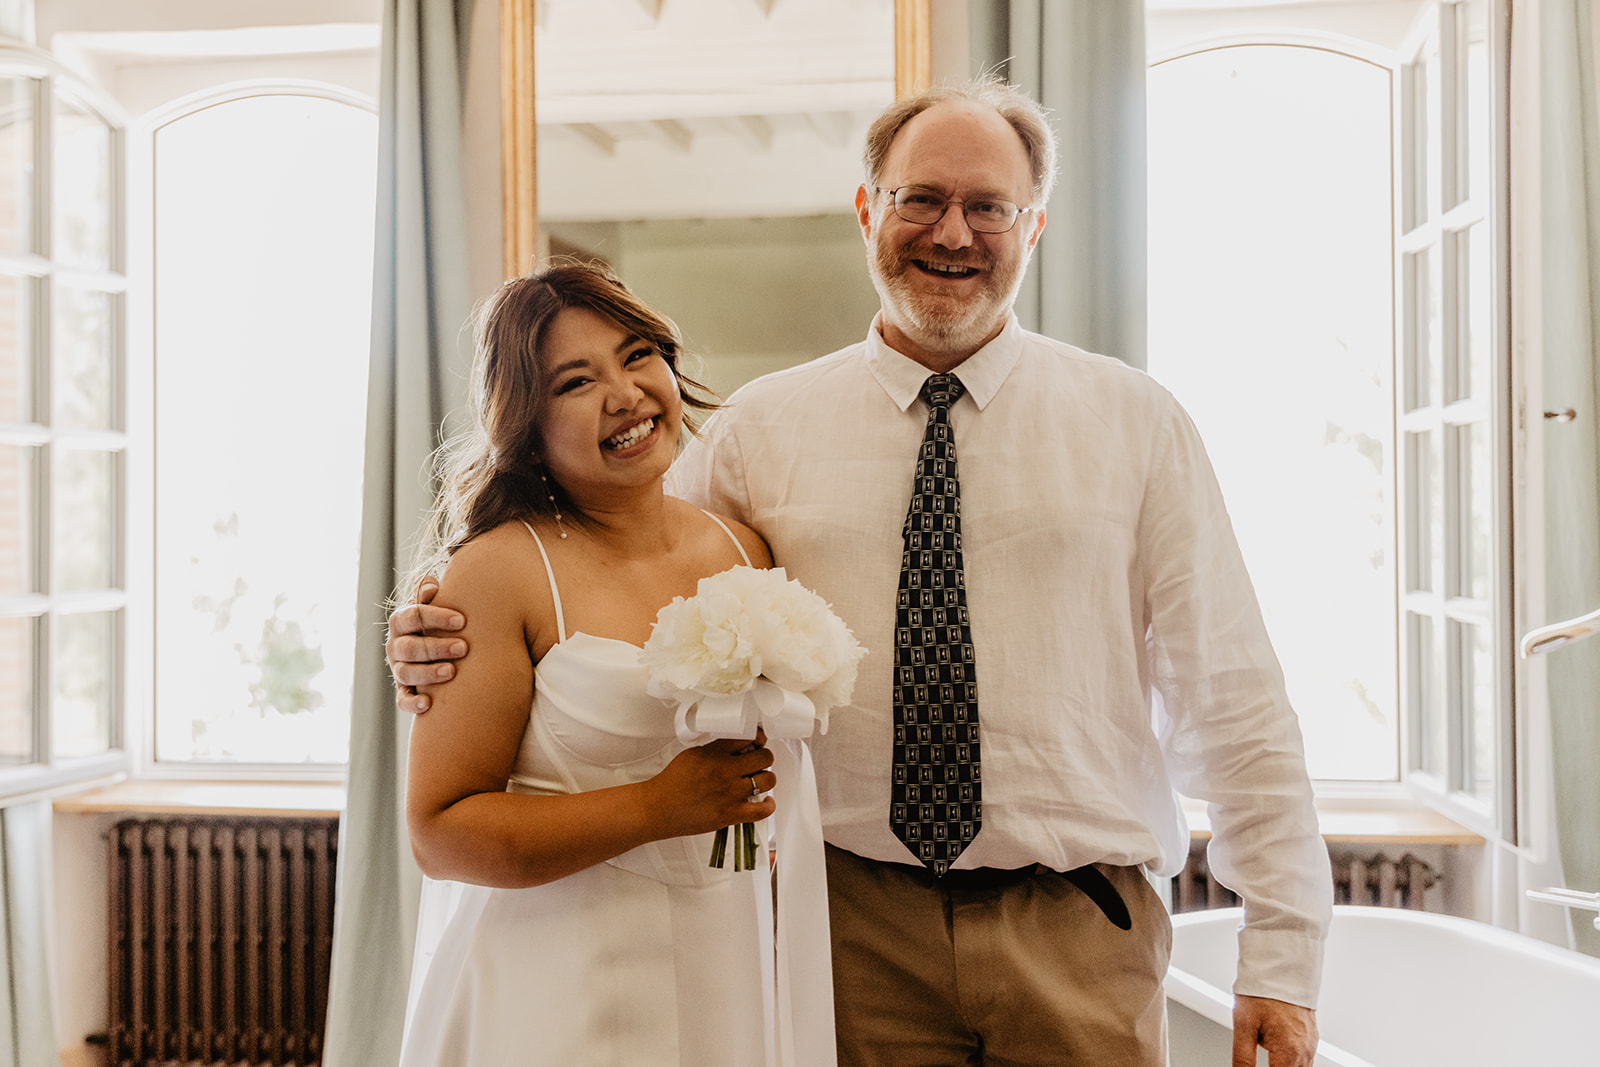 Bride and her father at a France Destination Wedding. Photography and Videography by Olive Joy Photography